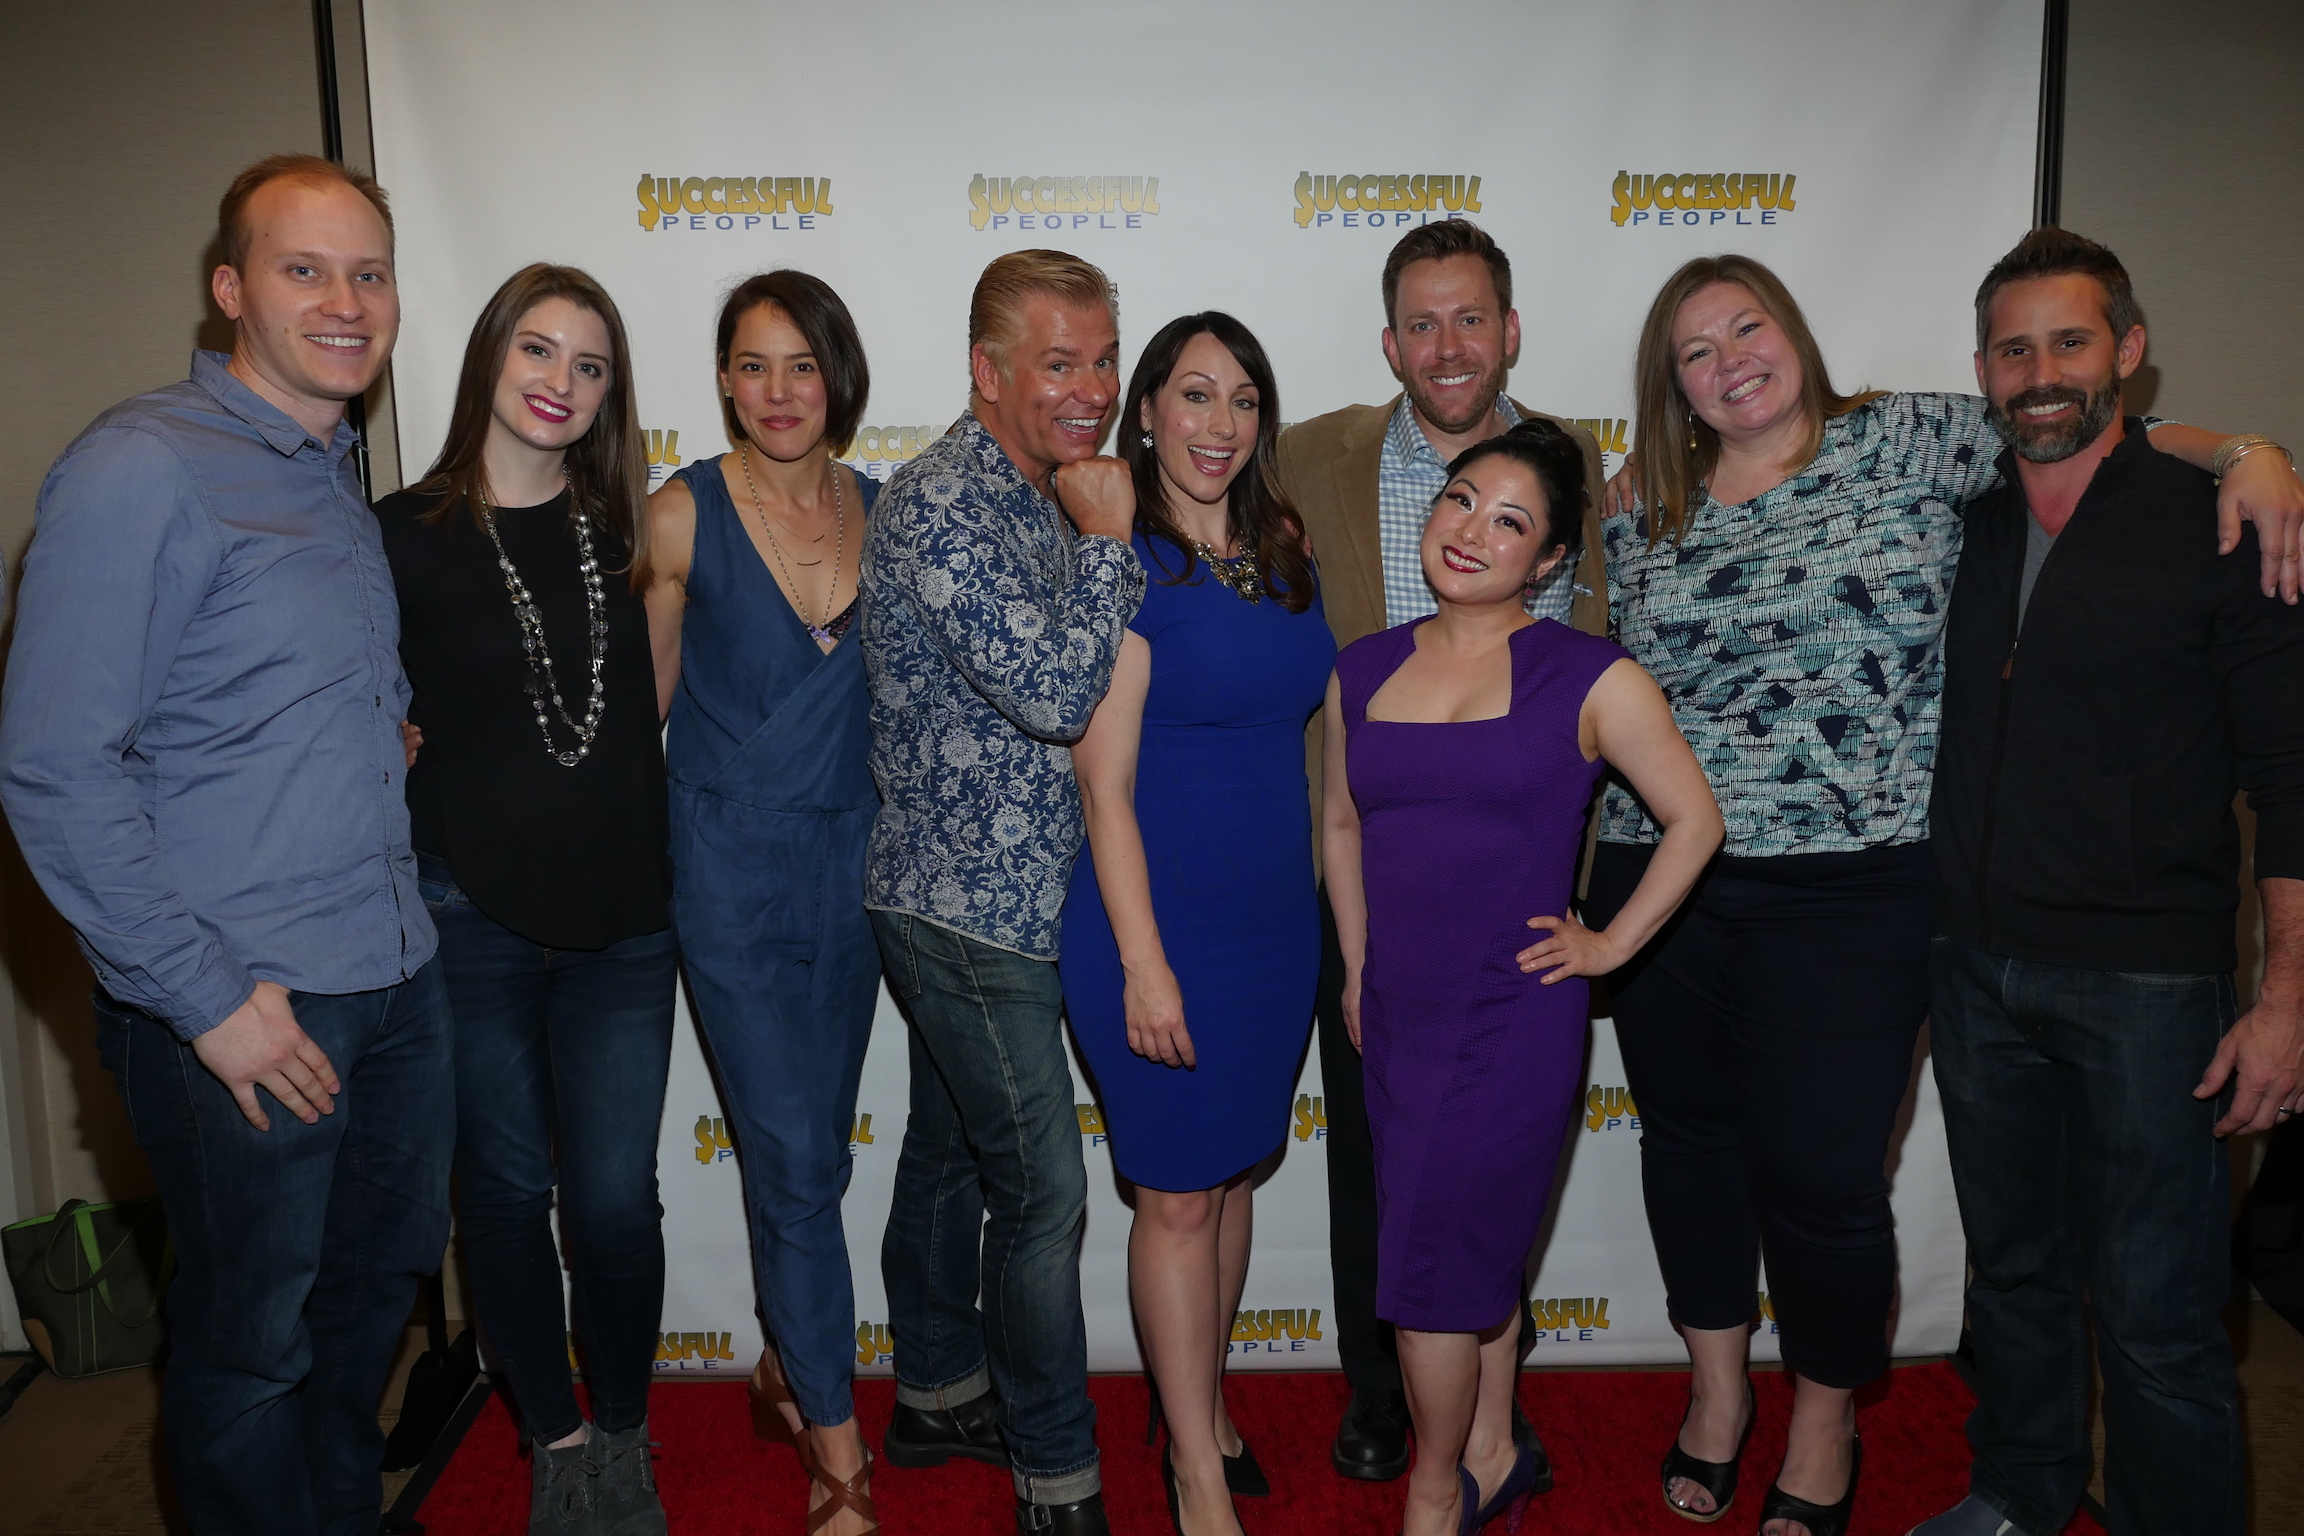 Cast of "Successful People" on the red carpet of the show's premiere screening